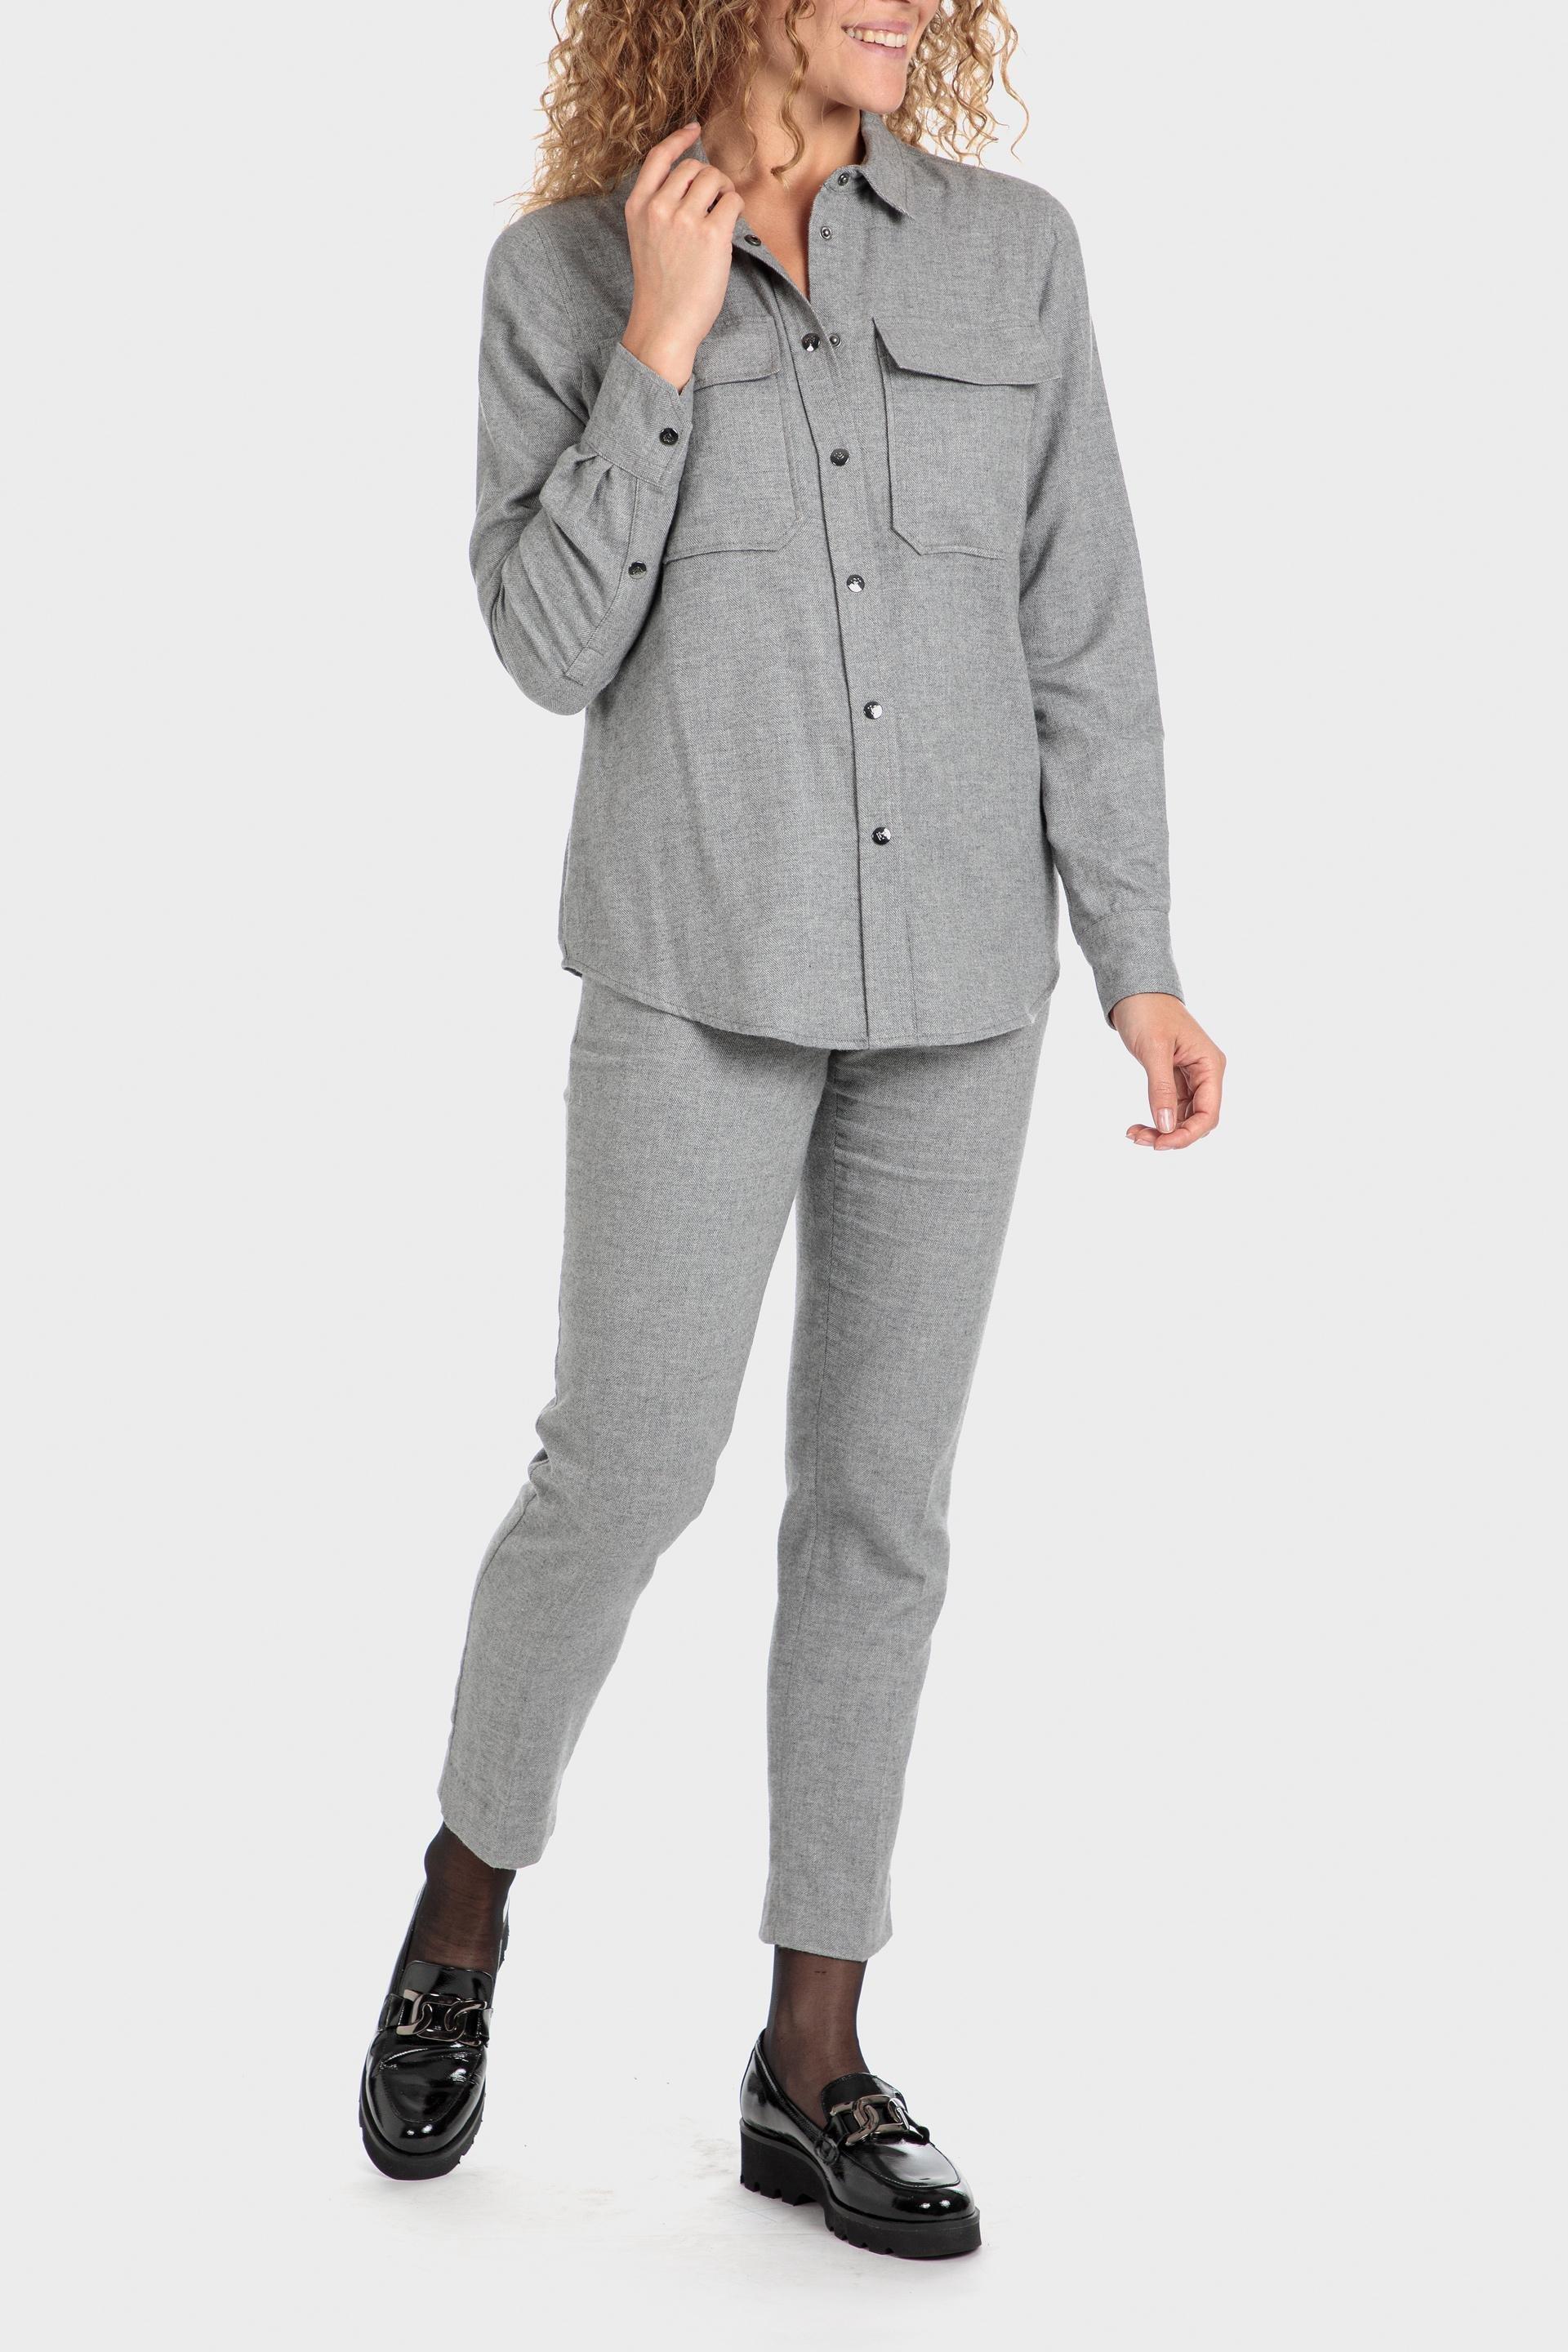 Punt Roma - Grey Buttoned Overshirt